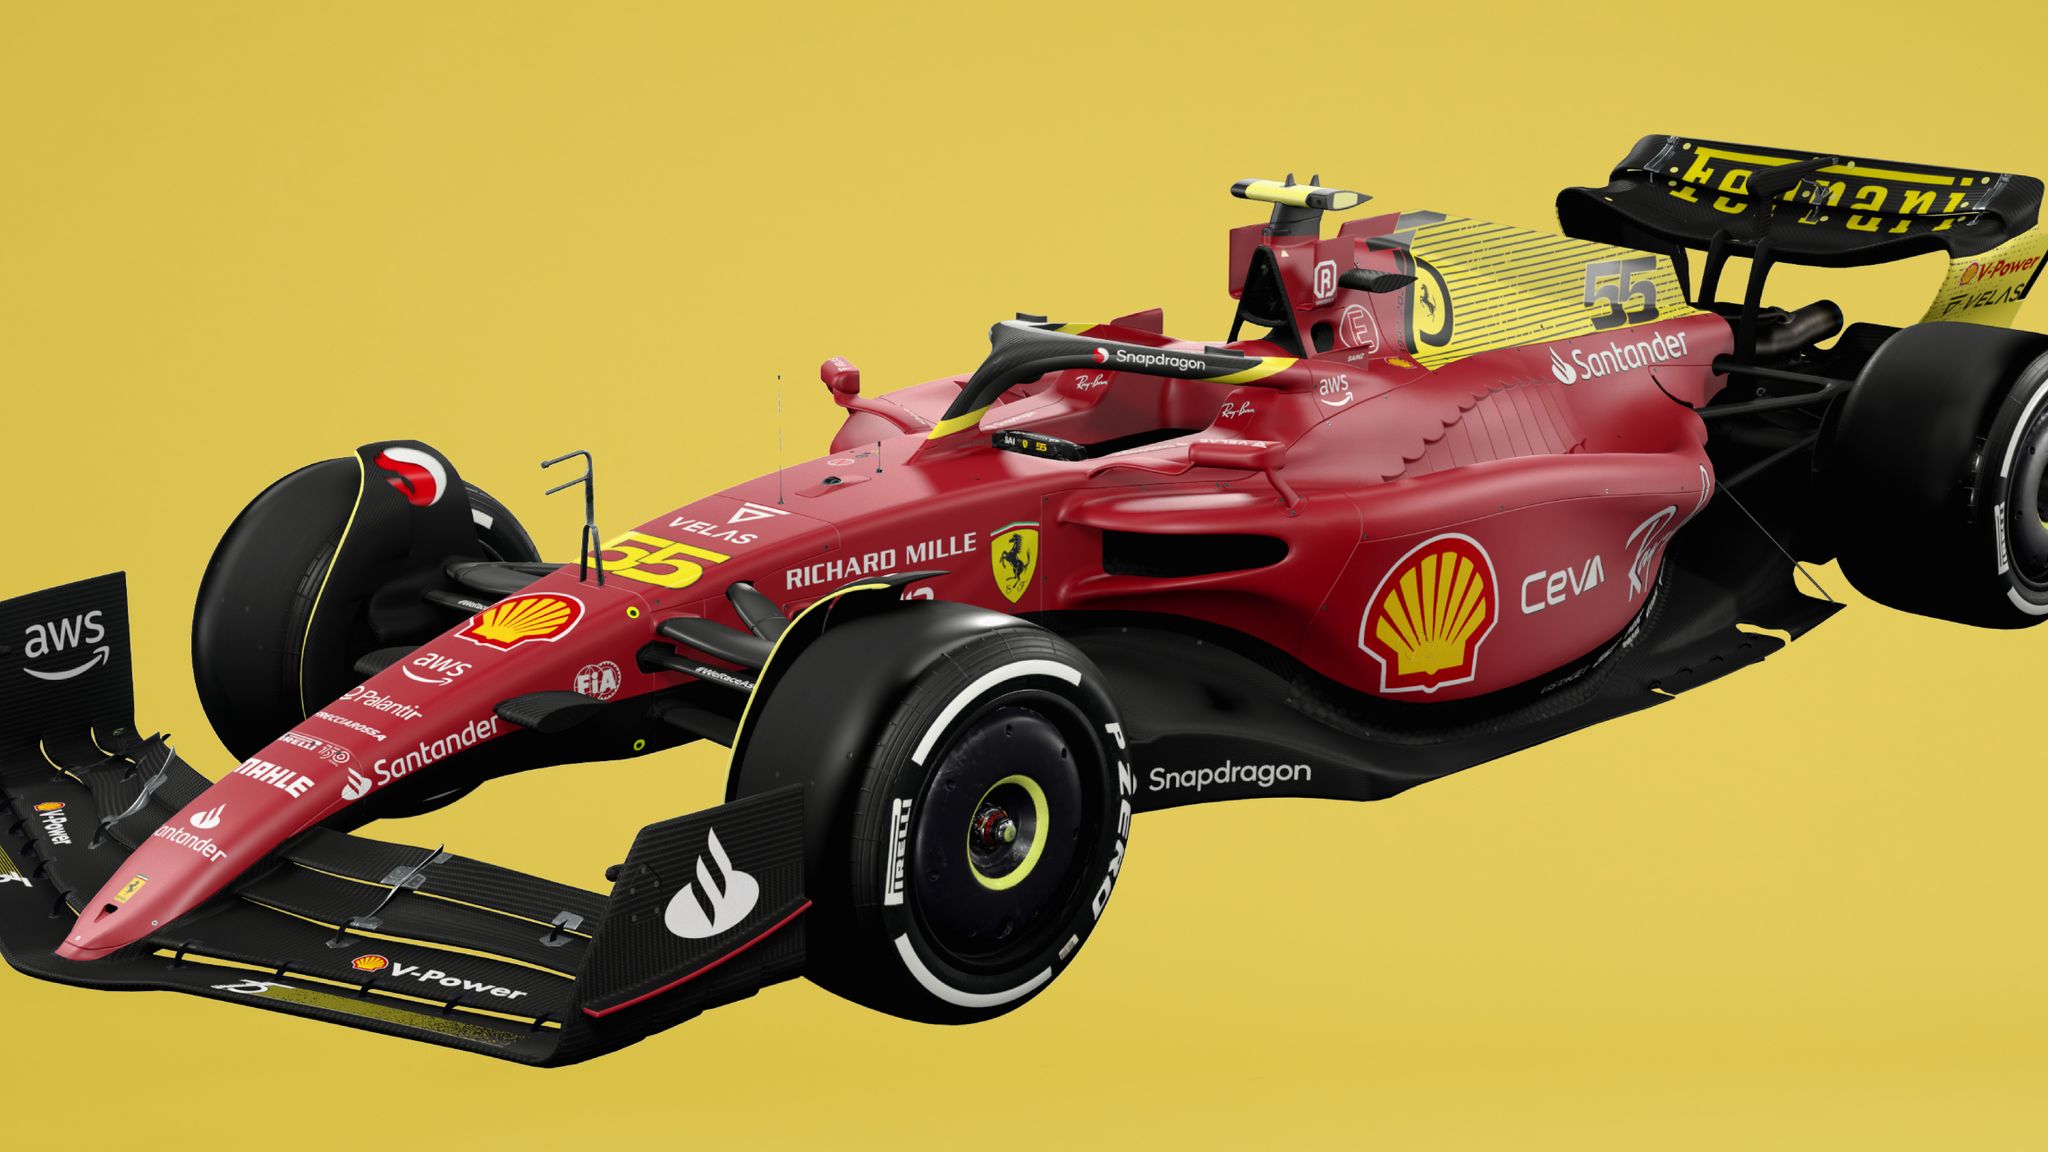 Italian GP: Ferrari reveal special yellow look for home race as